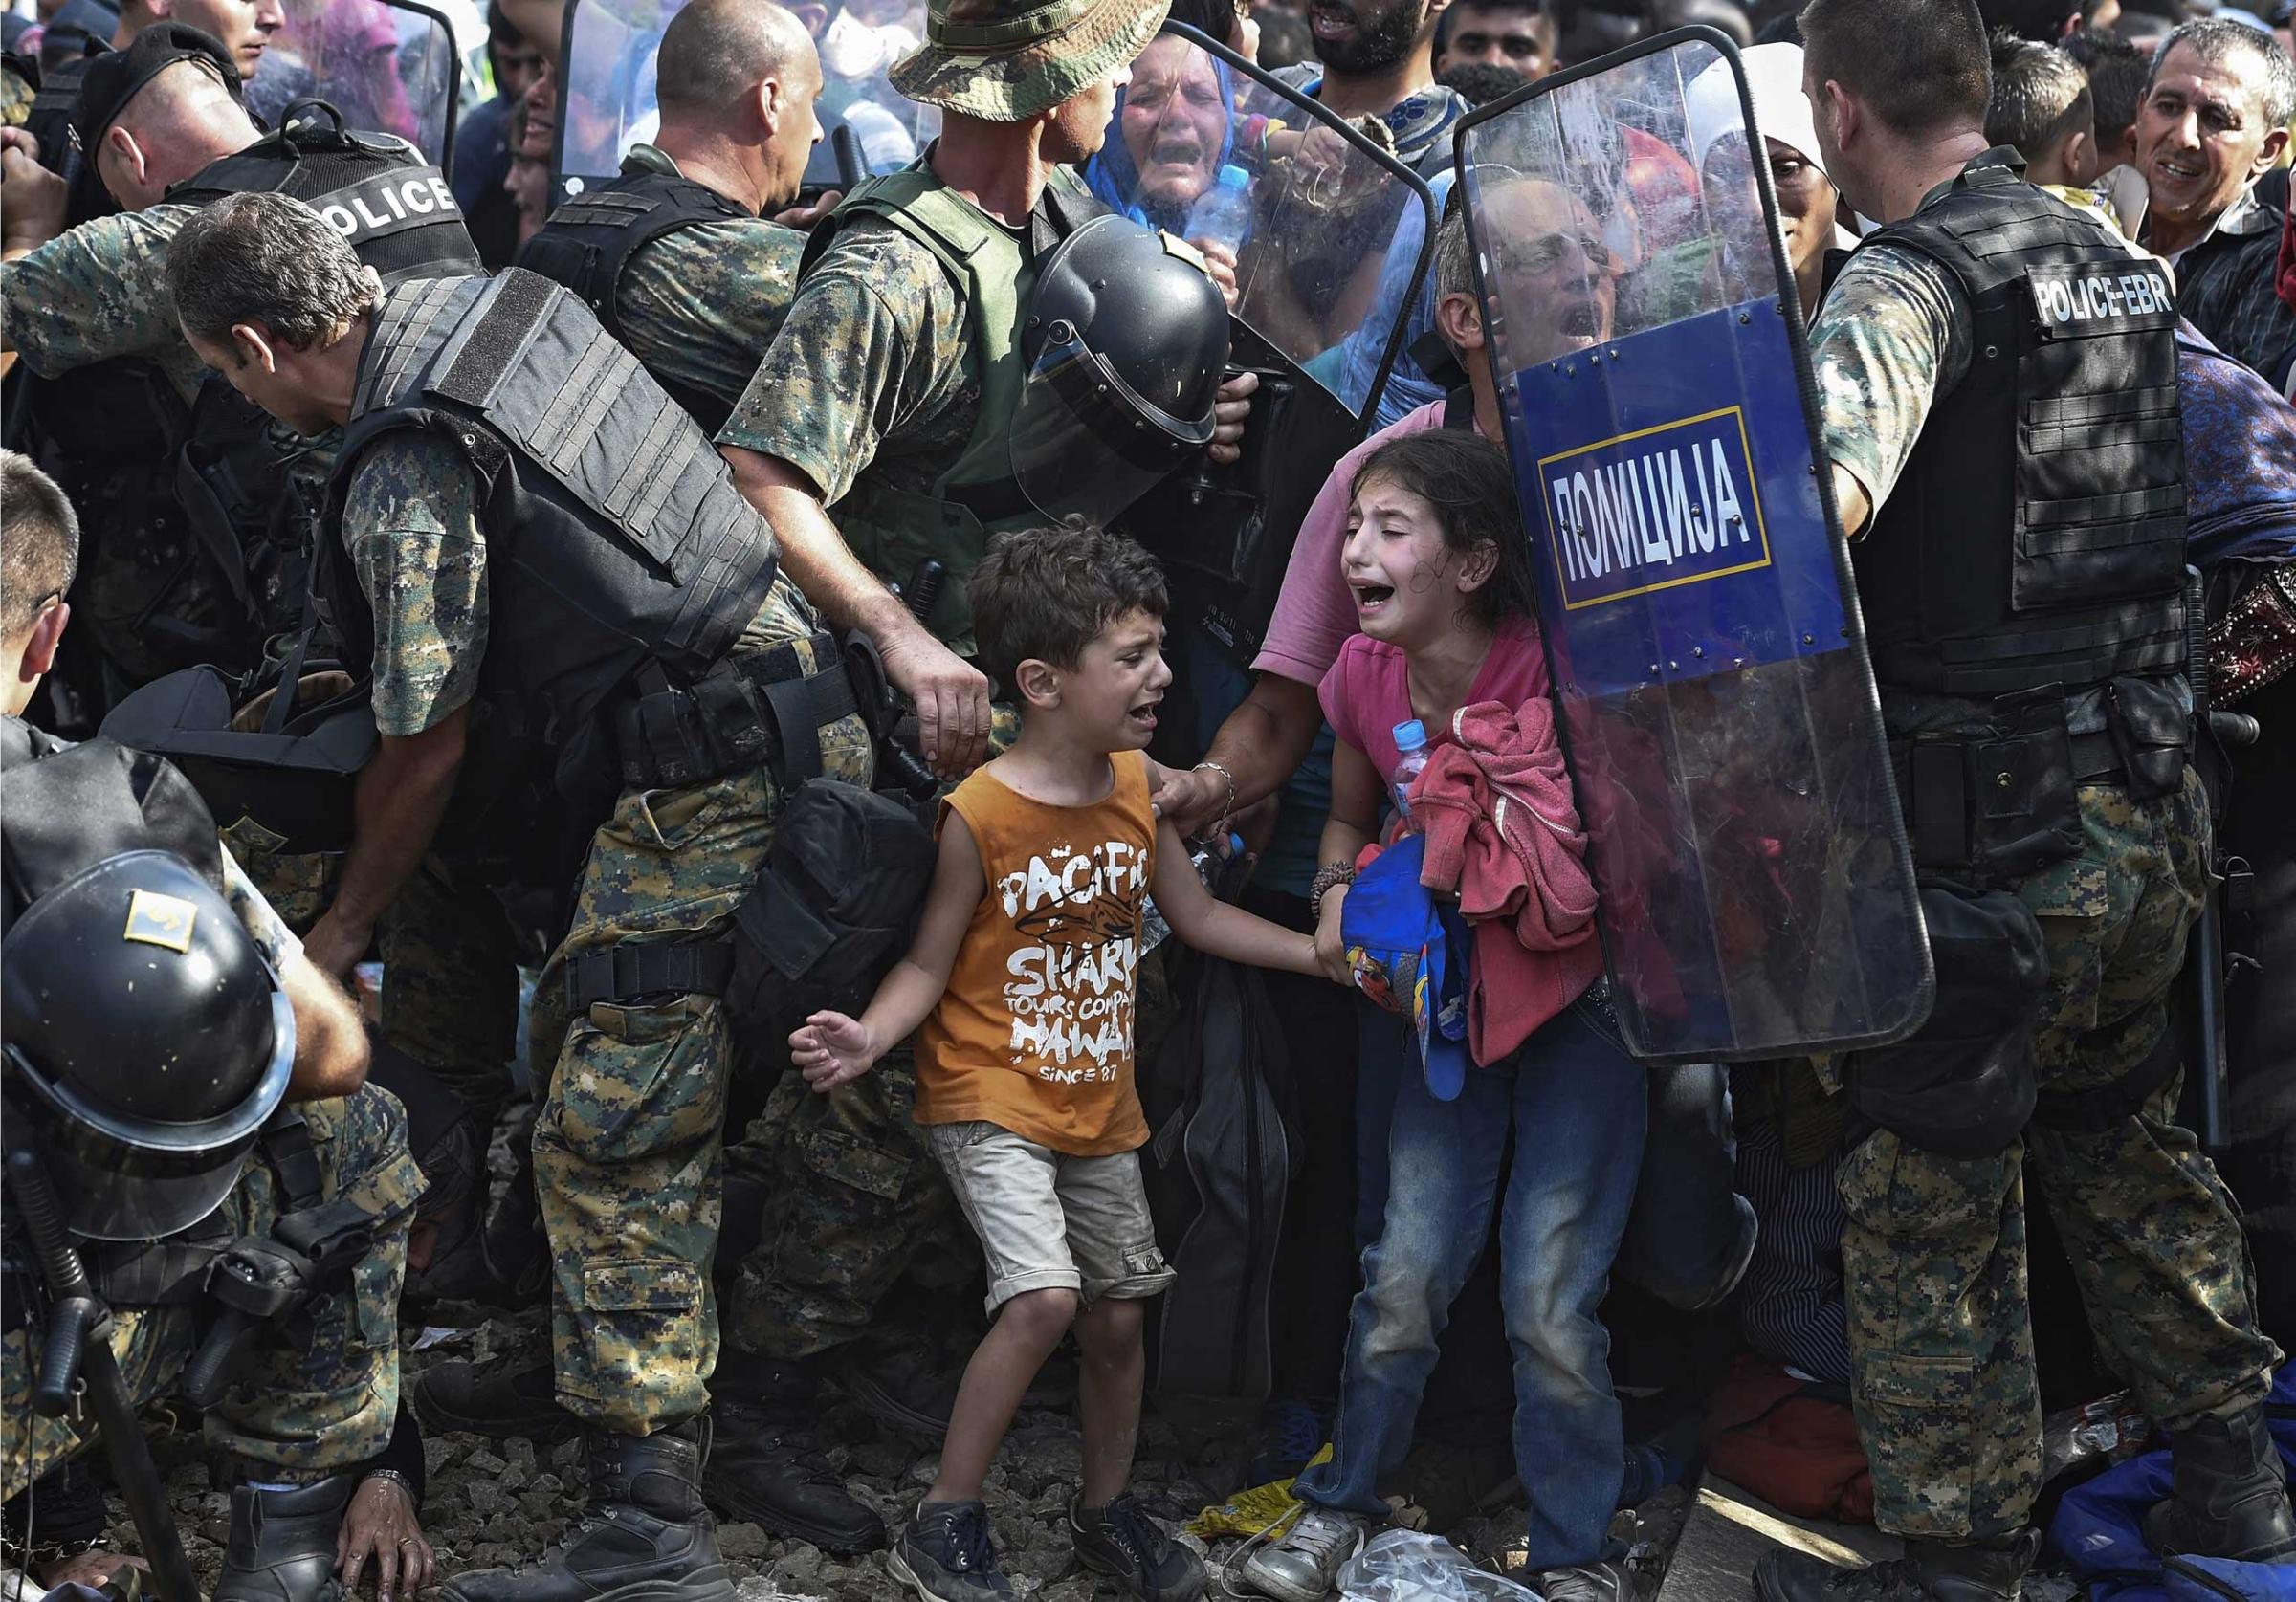 Children cry as migrants wait on the Greek side of the border break through a cordon of Macedonian special police forces to cross into Macedonia, near the southern city of Gevgelija, The Former Yugoslav Republic of Macedonia. Aug. 21, 2015.